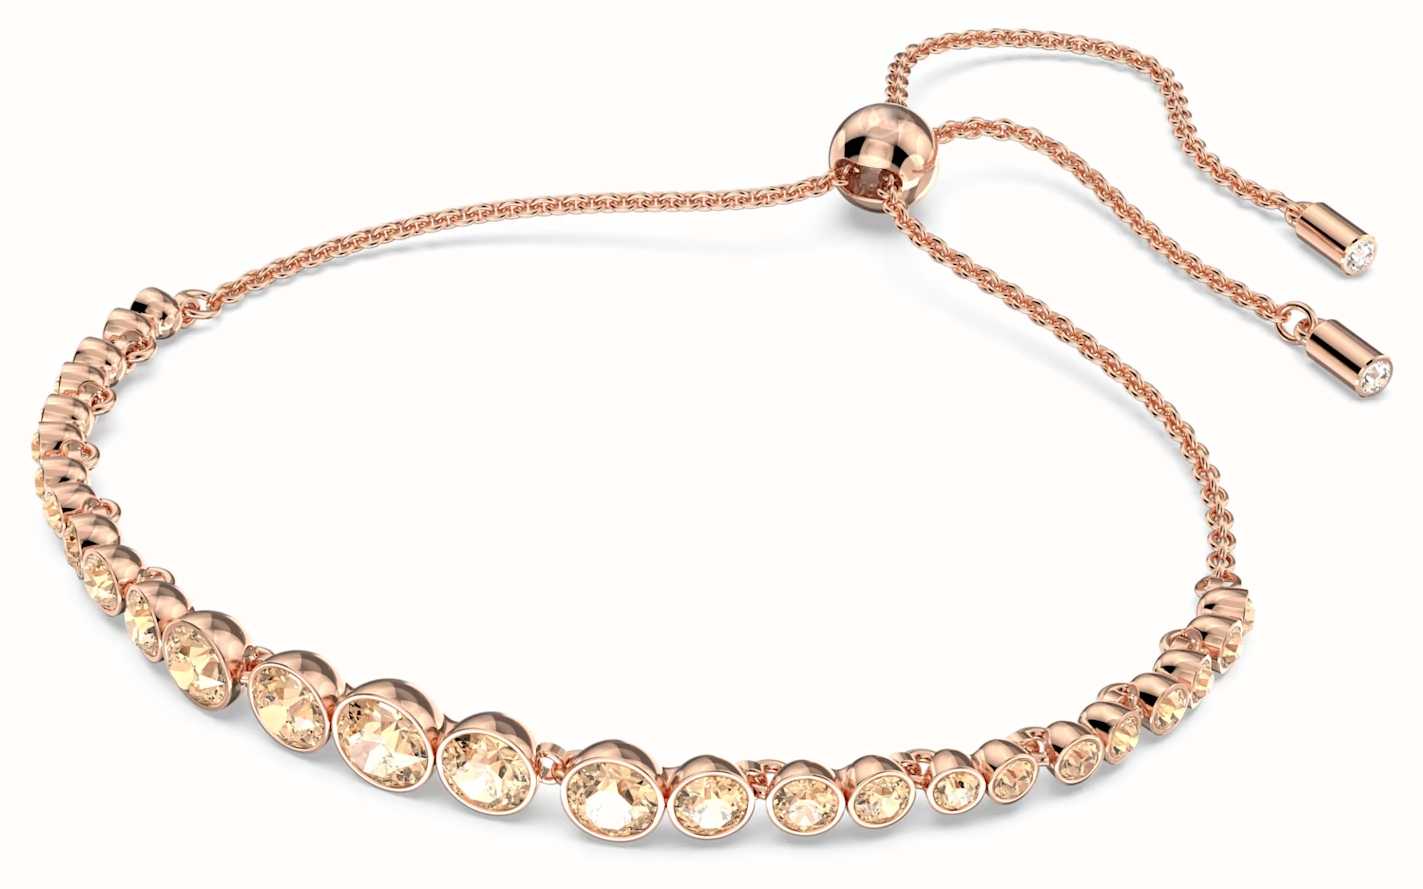 Swarovski Angelic Necklace, White Round Cut Crystals in a Rose Gold-Tone  Plated Setting : Amazon.com.au: Clothing, Shoes & Accessories